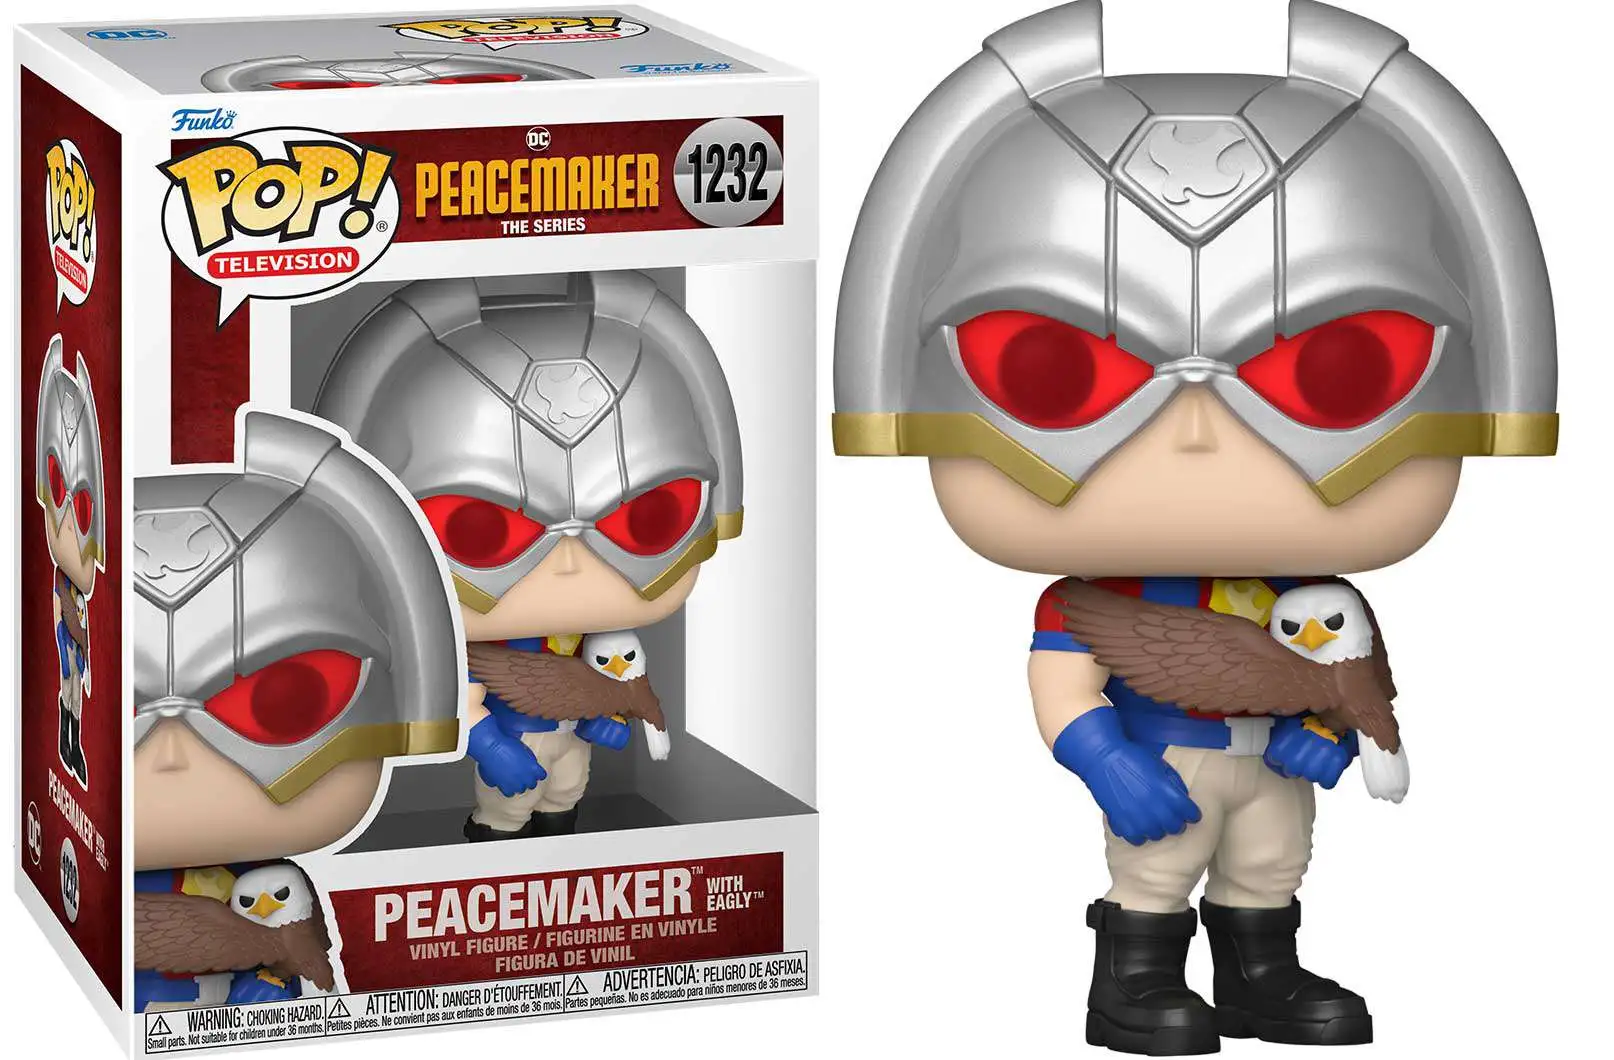 TV Peacemaker Peacemaker with Eagly Funko Pop 